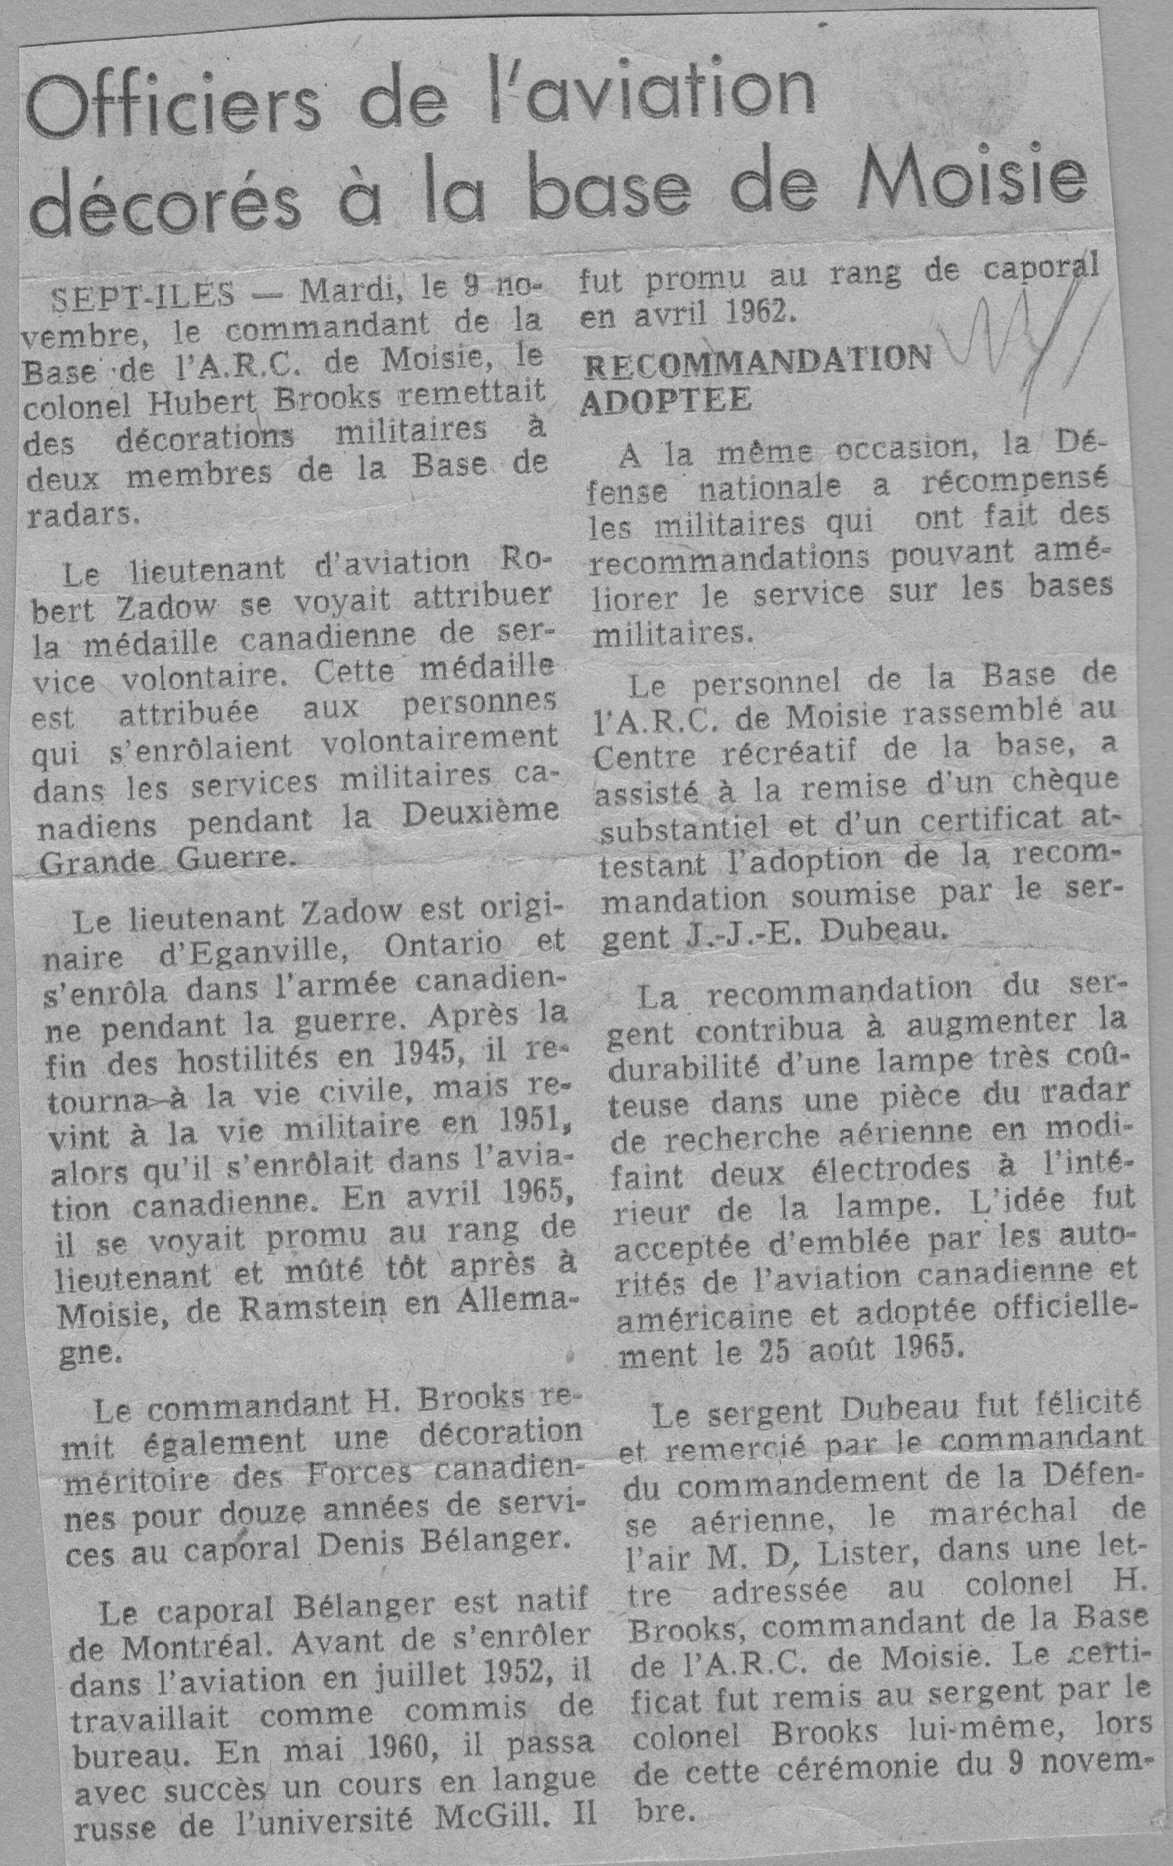 Photo: L'Avenir News Article on Officer Decorations at RCAF Moisie 